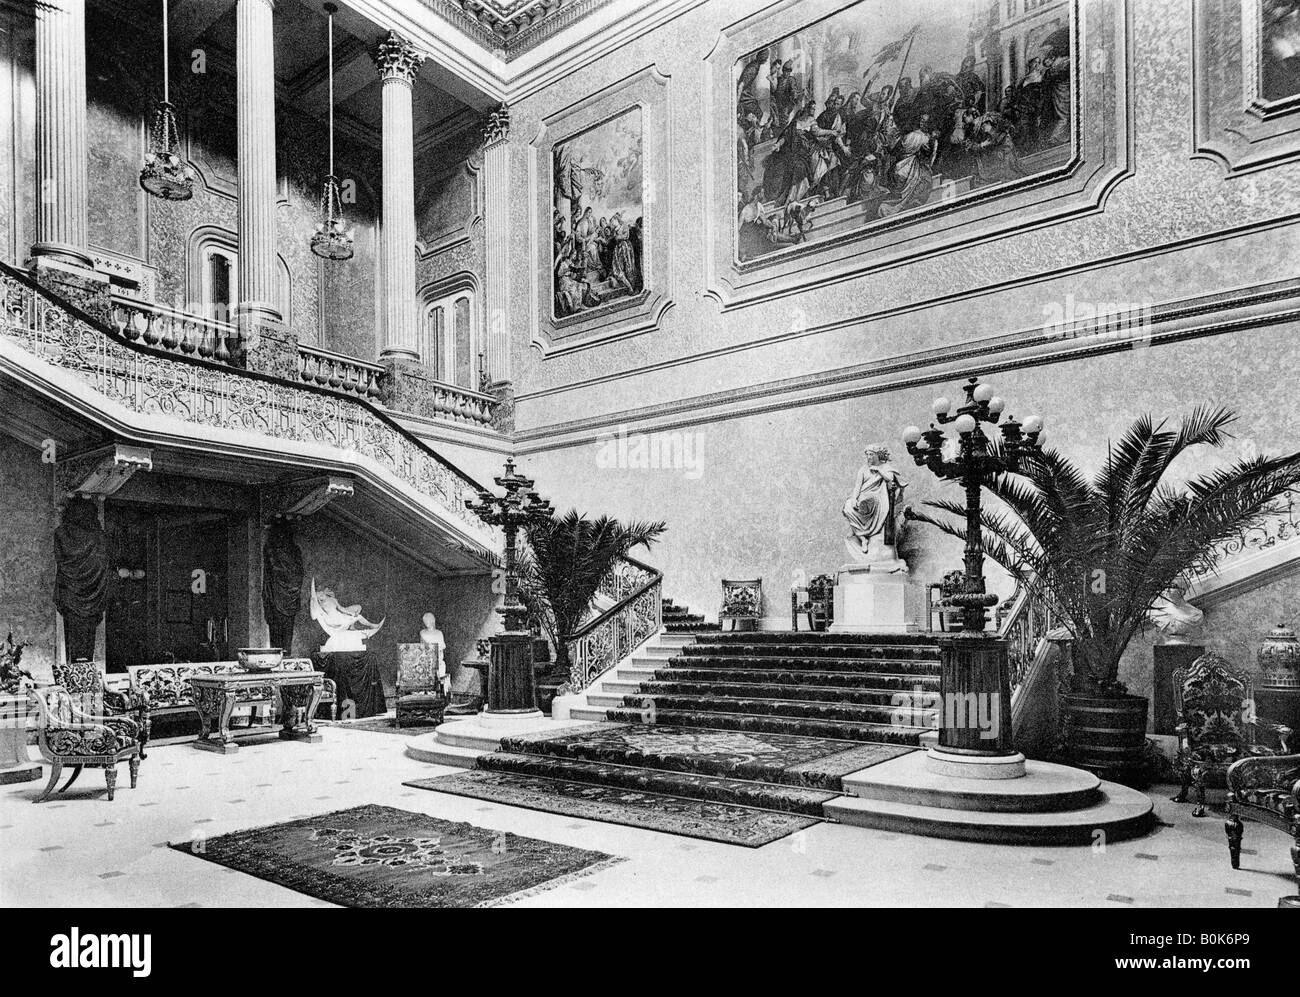 The great hall, Stafford House, 1908.Artist: Bedford Lemere and Company Stock Photo